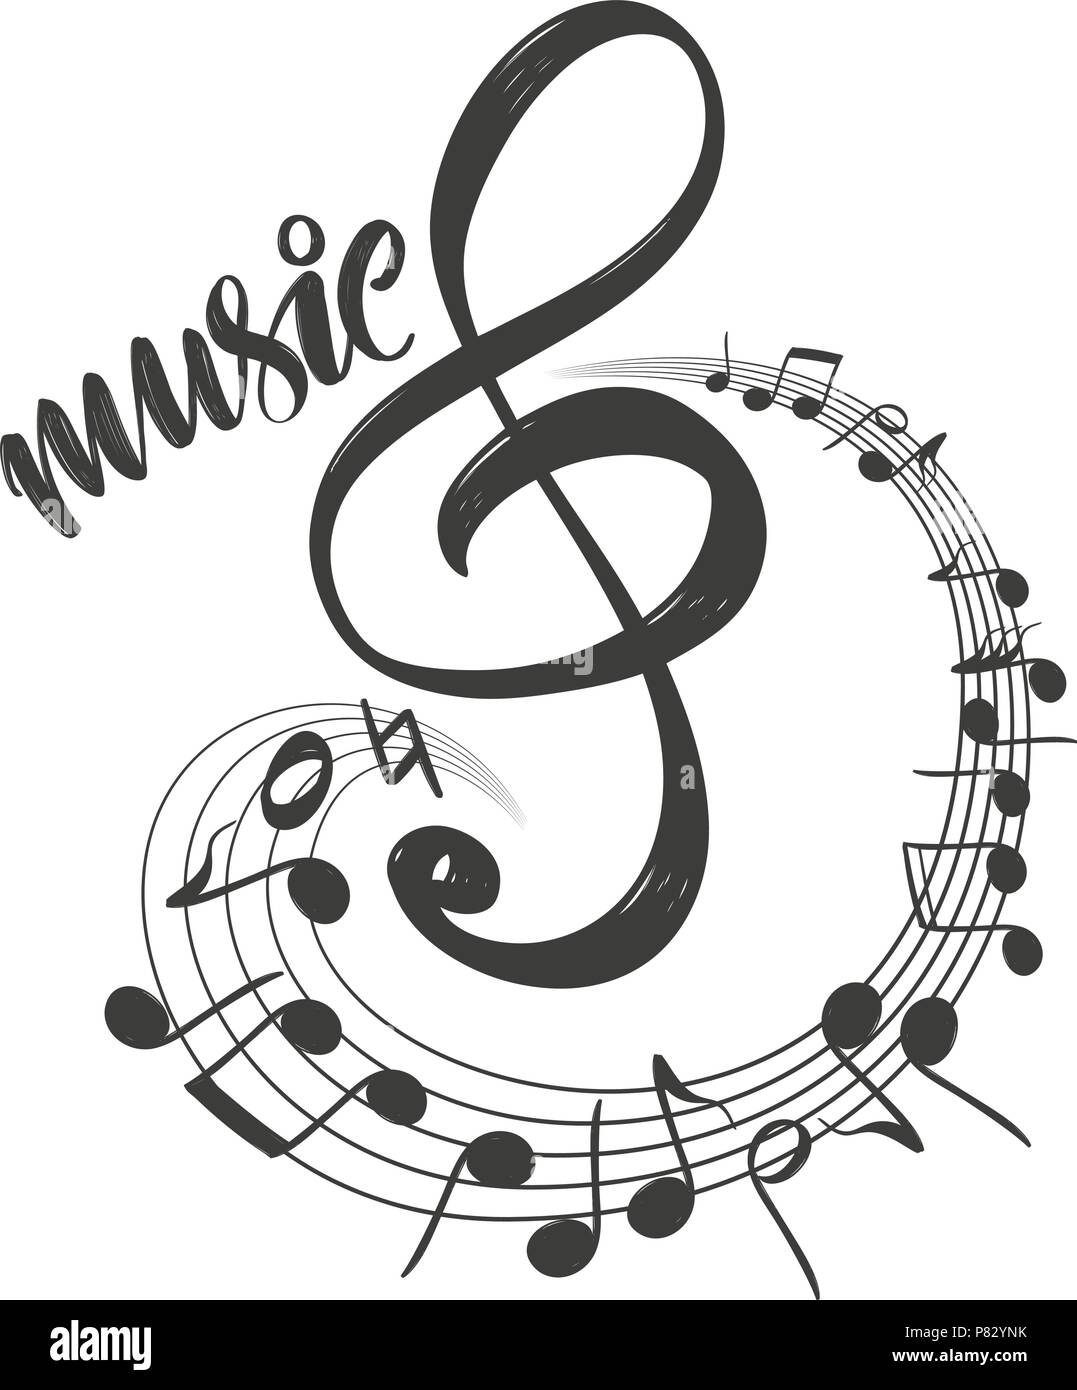 musical notes icon, love music, calligraphy text hand drawn vector illustration sketch Stock Vector